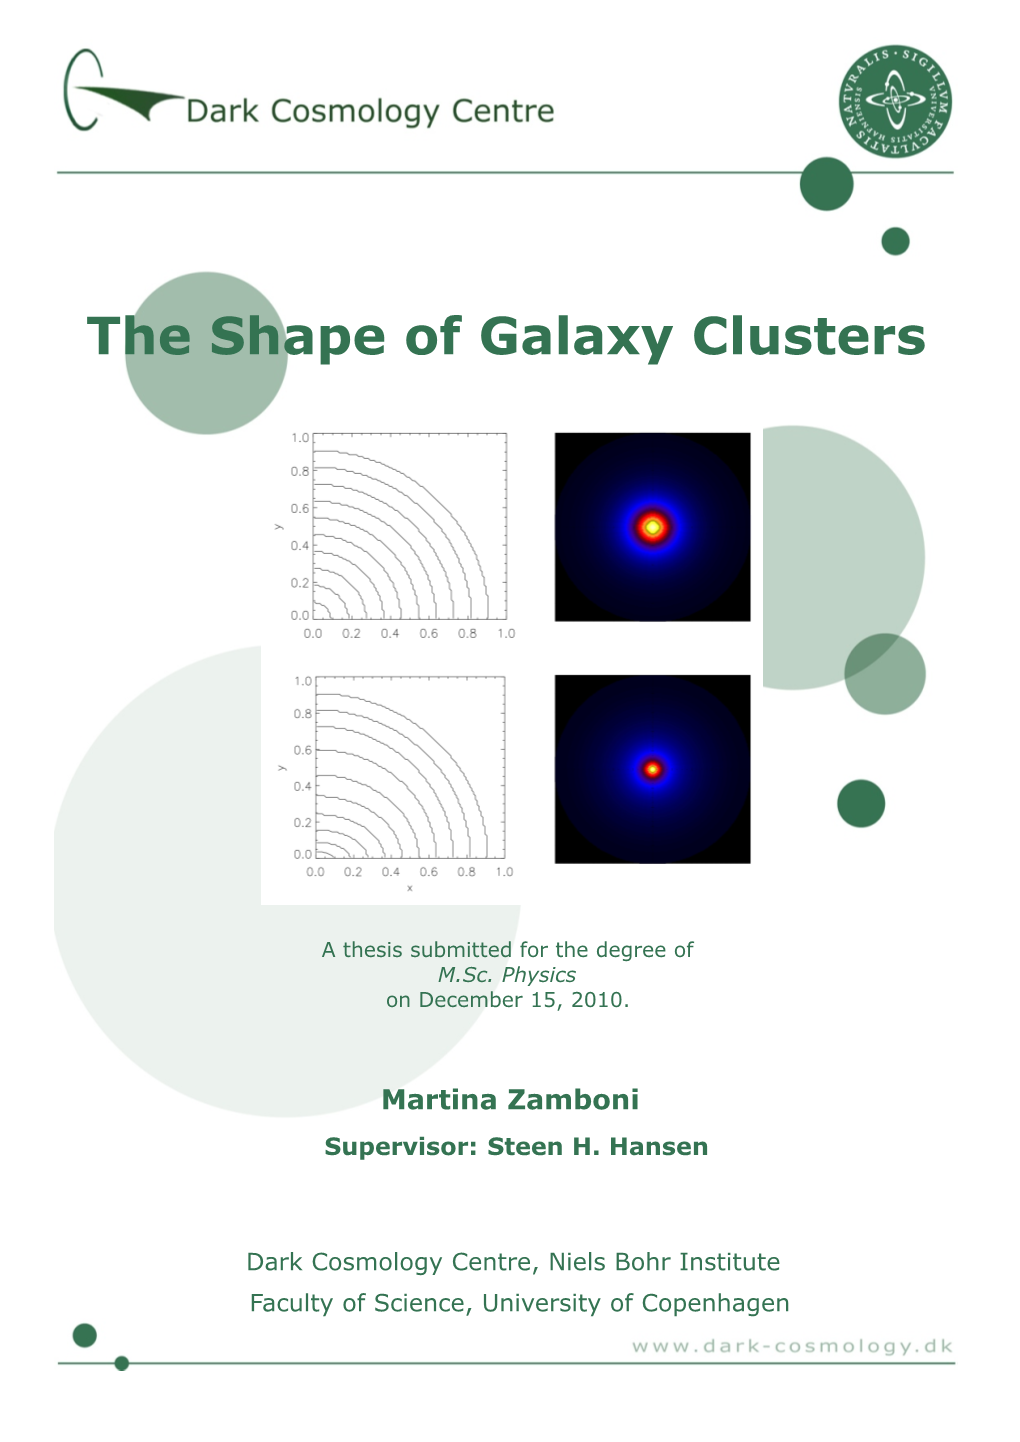 The Shape of Galaxy Clusters